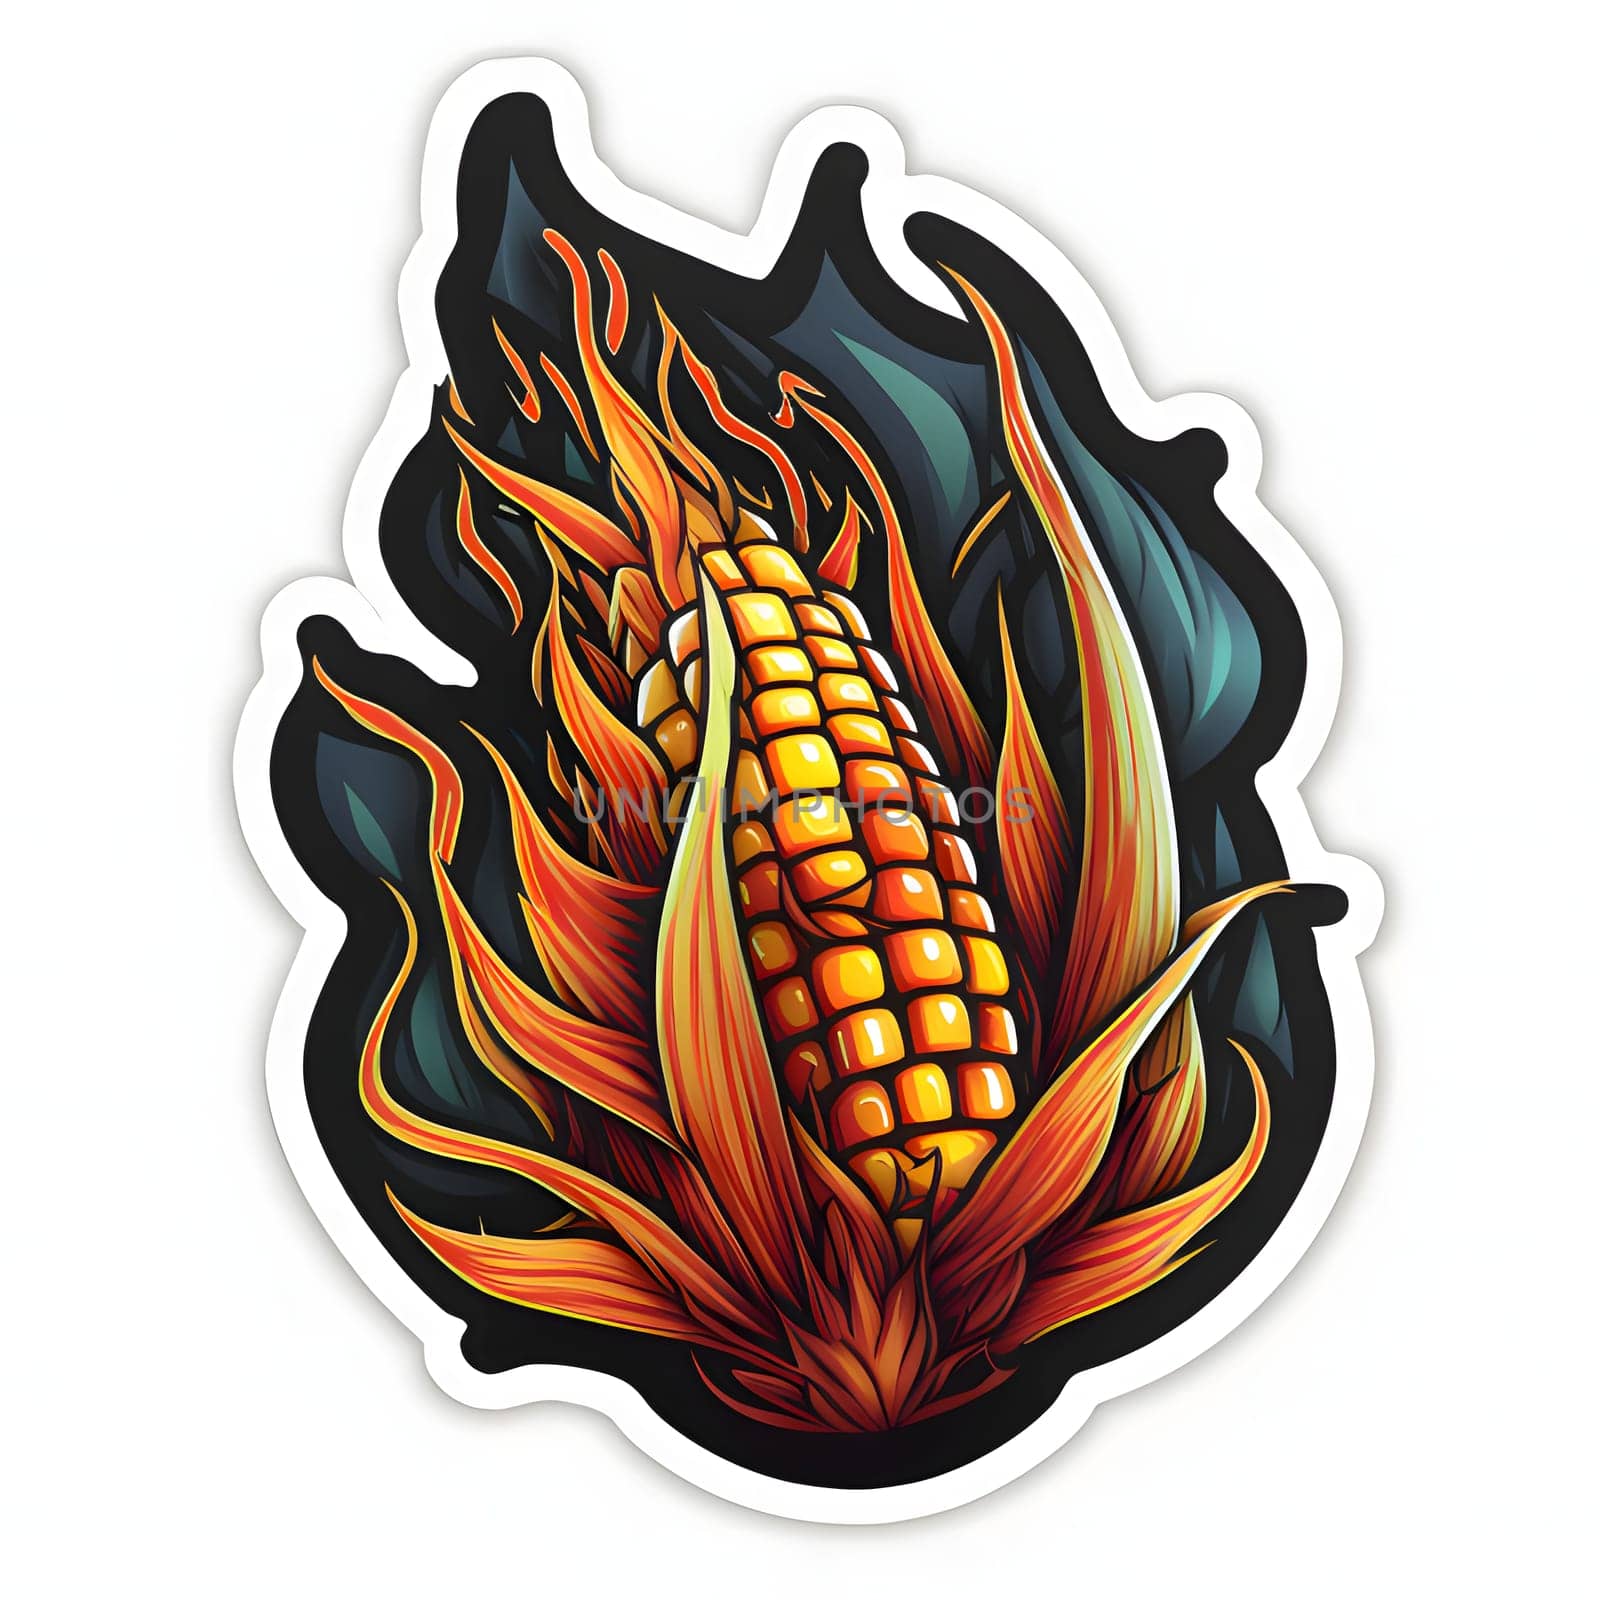 Sticker corn cob on a background of flames of fire. Corn as a dish of thanksgiving for the harvest, a picture on a white isolated background. An atmosphere of joy and celebration.